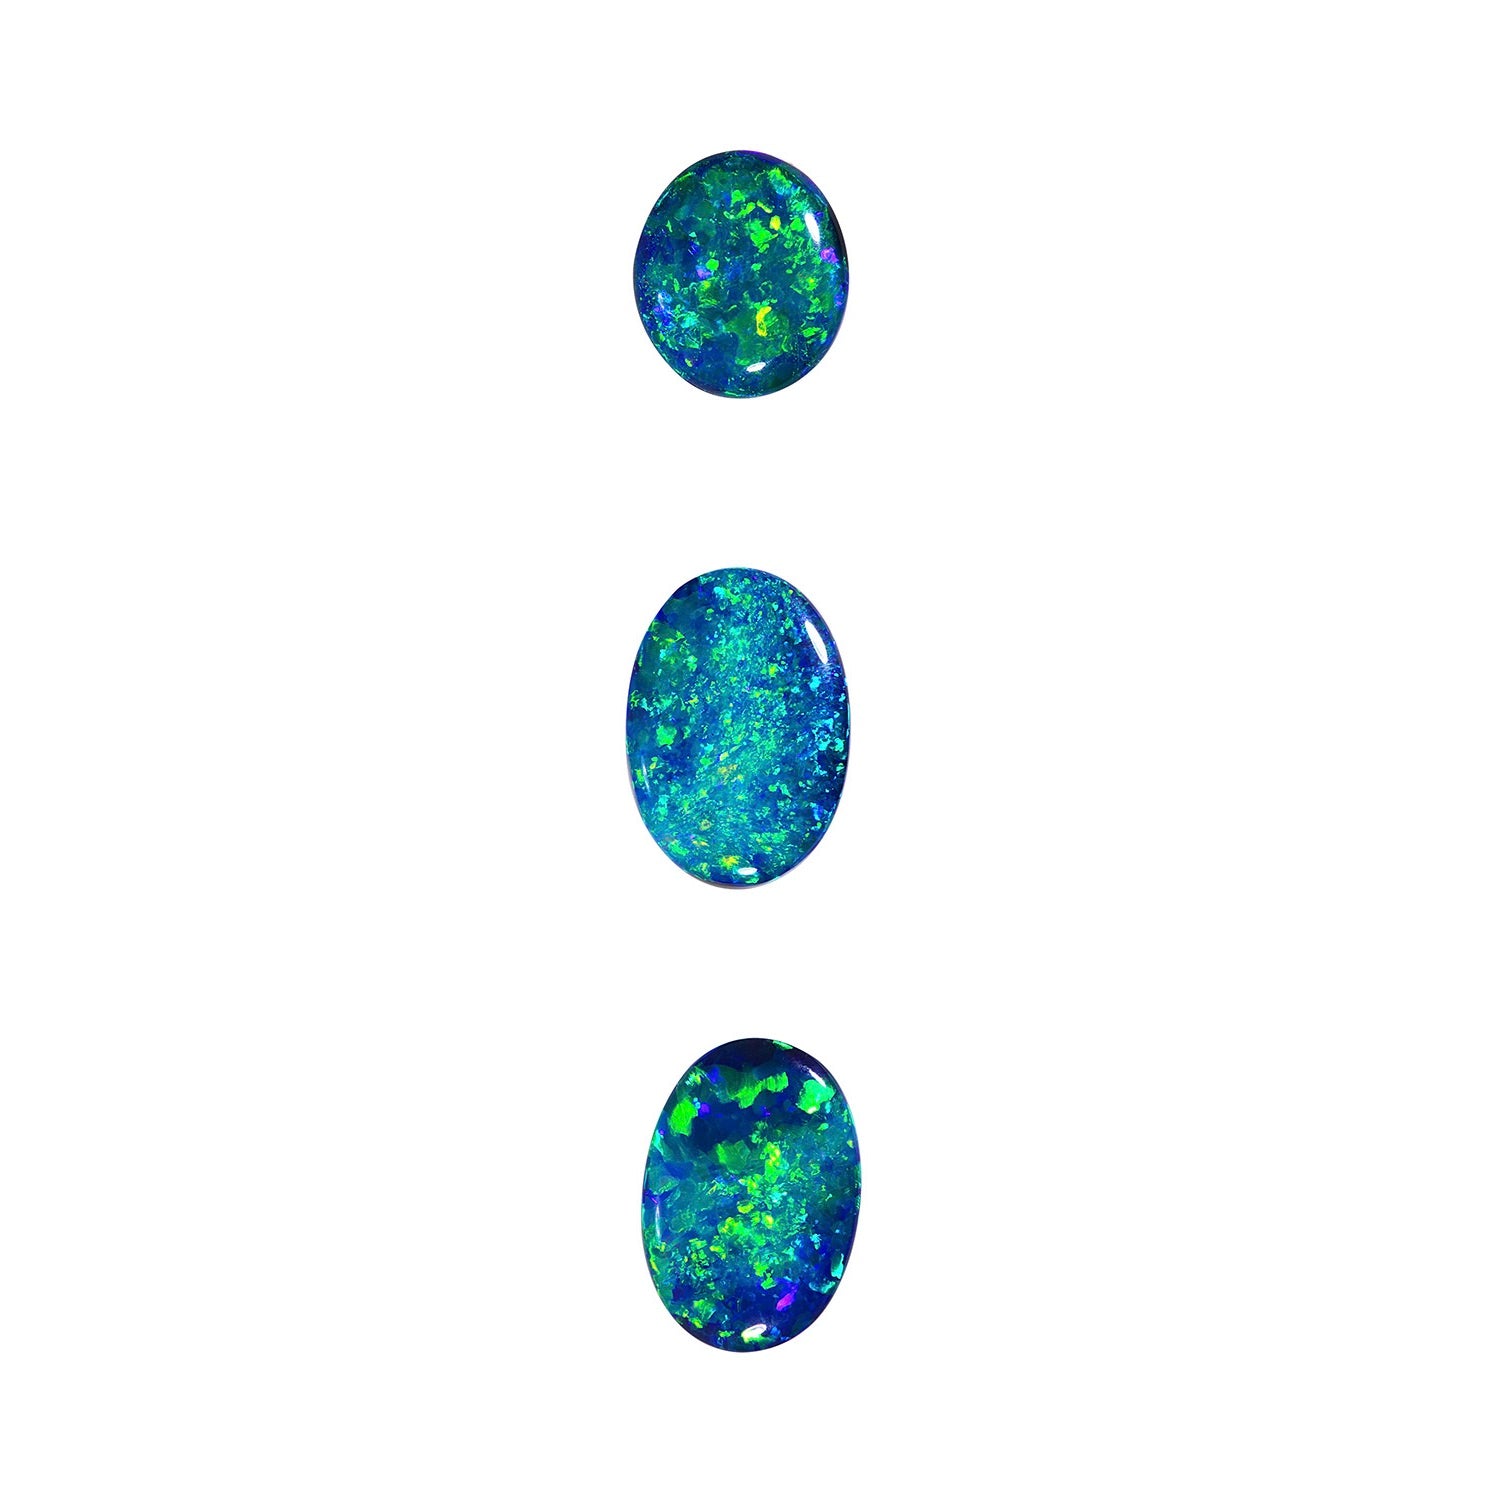 Layout of three gem quality Australian black opals with mesmerizing blues and greens. Sizes: 1.85cts (10.7 x 9 x 3.2 mm), 2.35cts (10.7 x 9.2 x 3.6 mm), and 2.56cts (13.6 x 9.6 x 3.3 mm). Perfect for a show-stopping necklace.